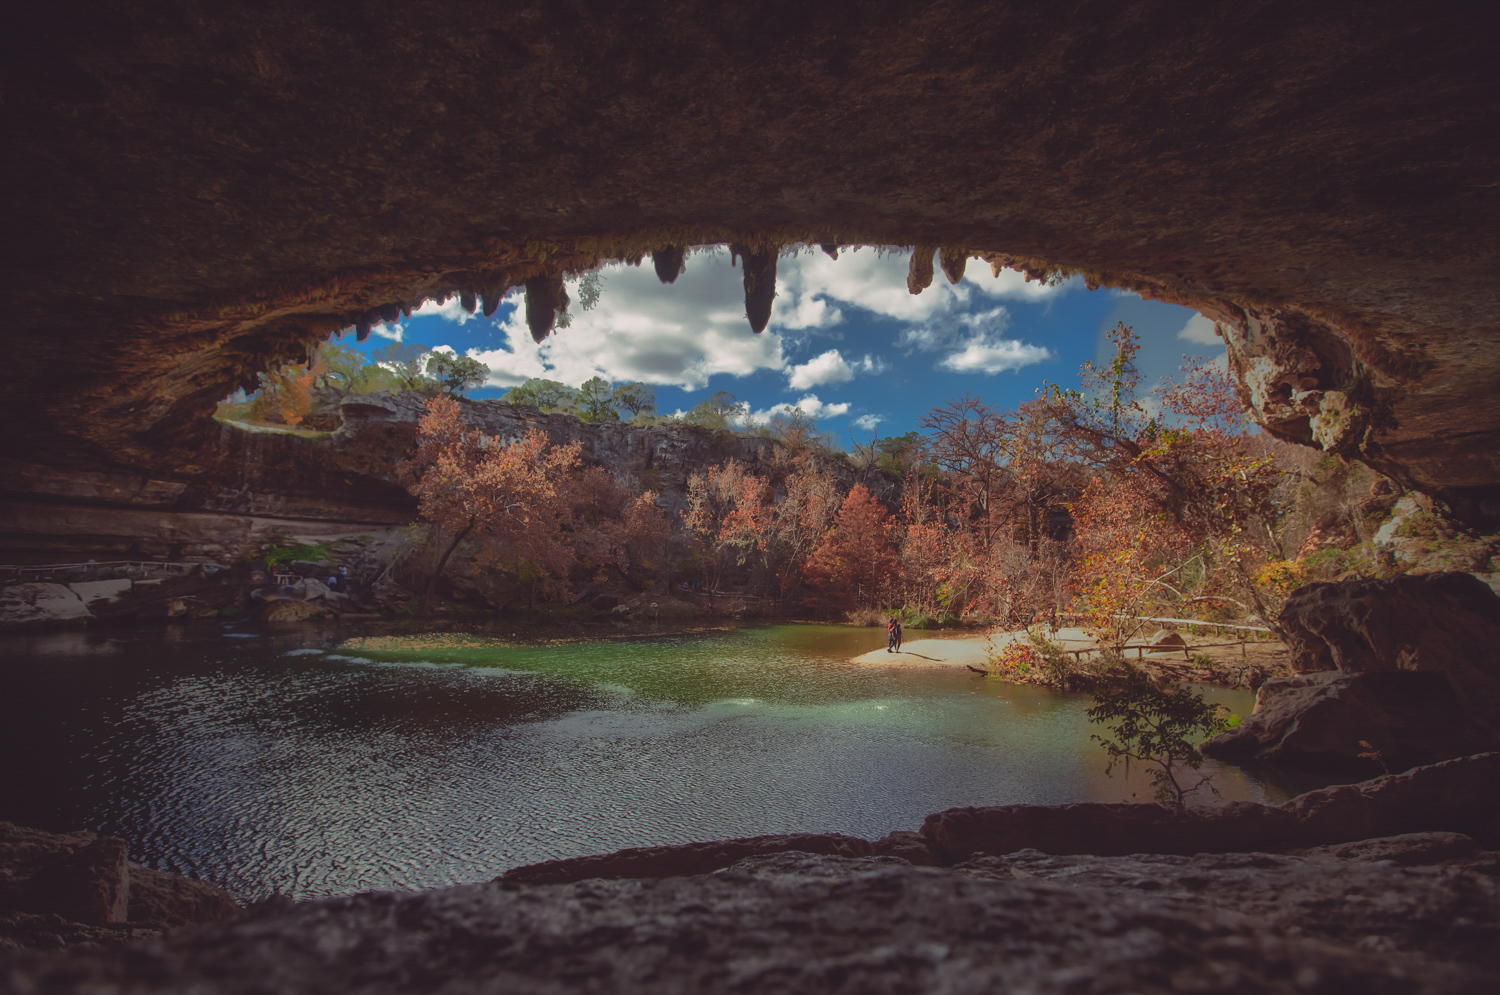 Hamilton Pool Cave Dripping Springs